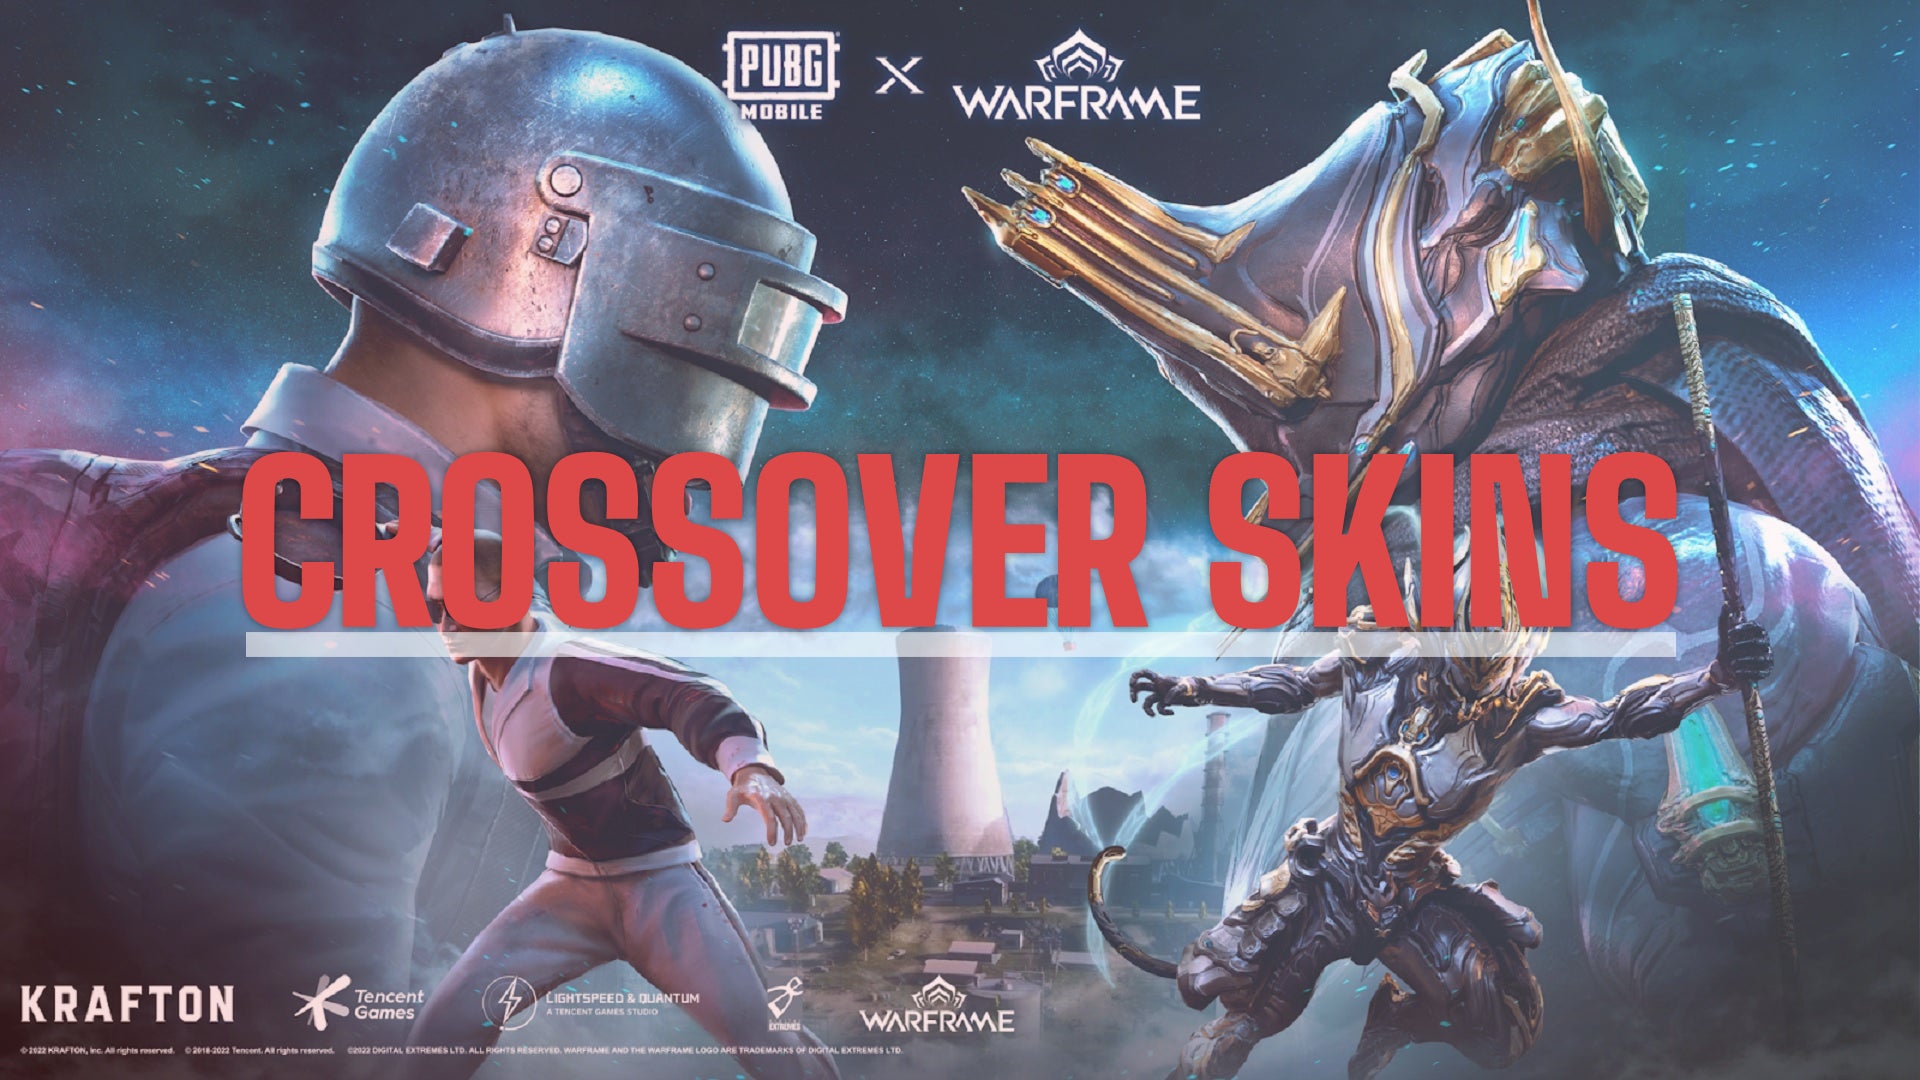 Pubg Mobile To Get Warframe Skins In Limited Time Crossover Vg247